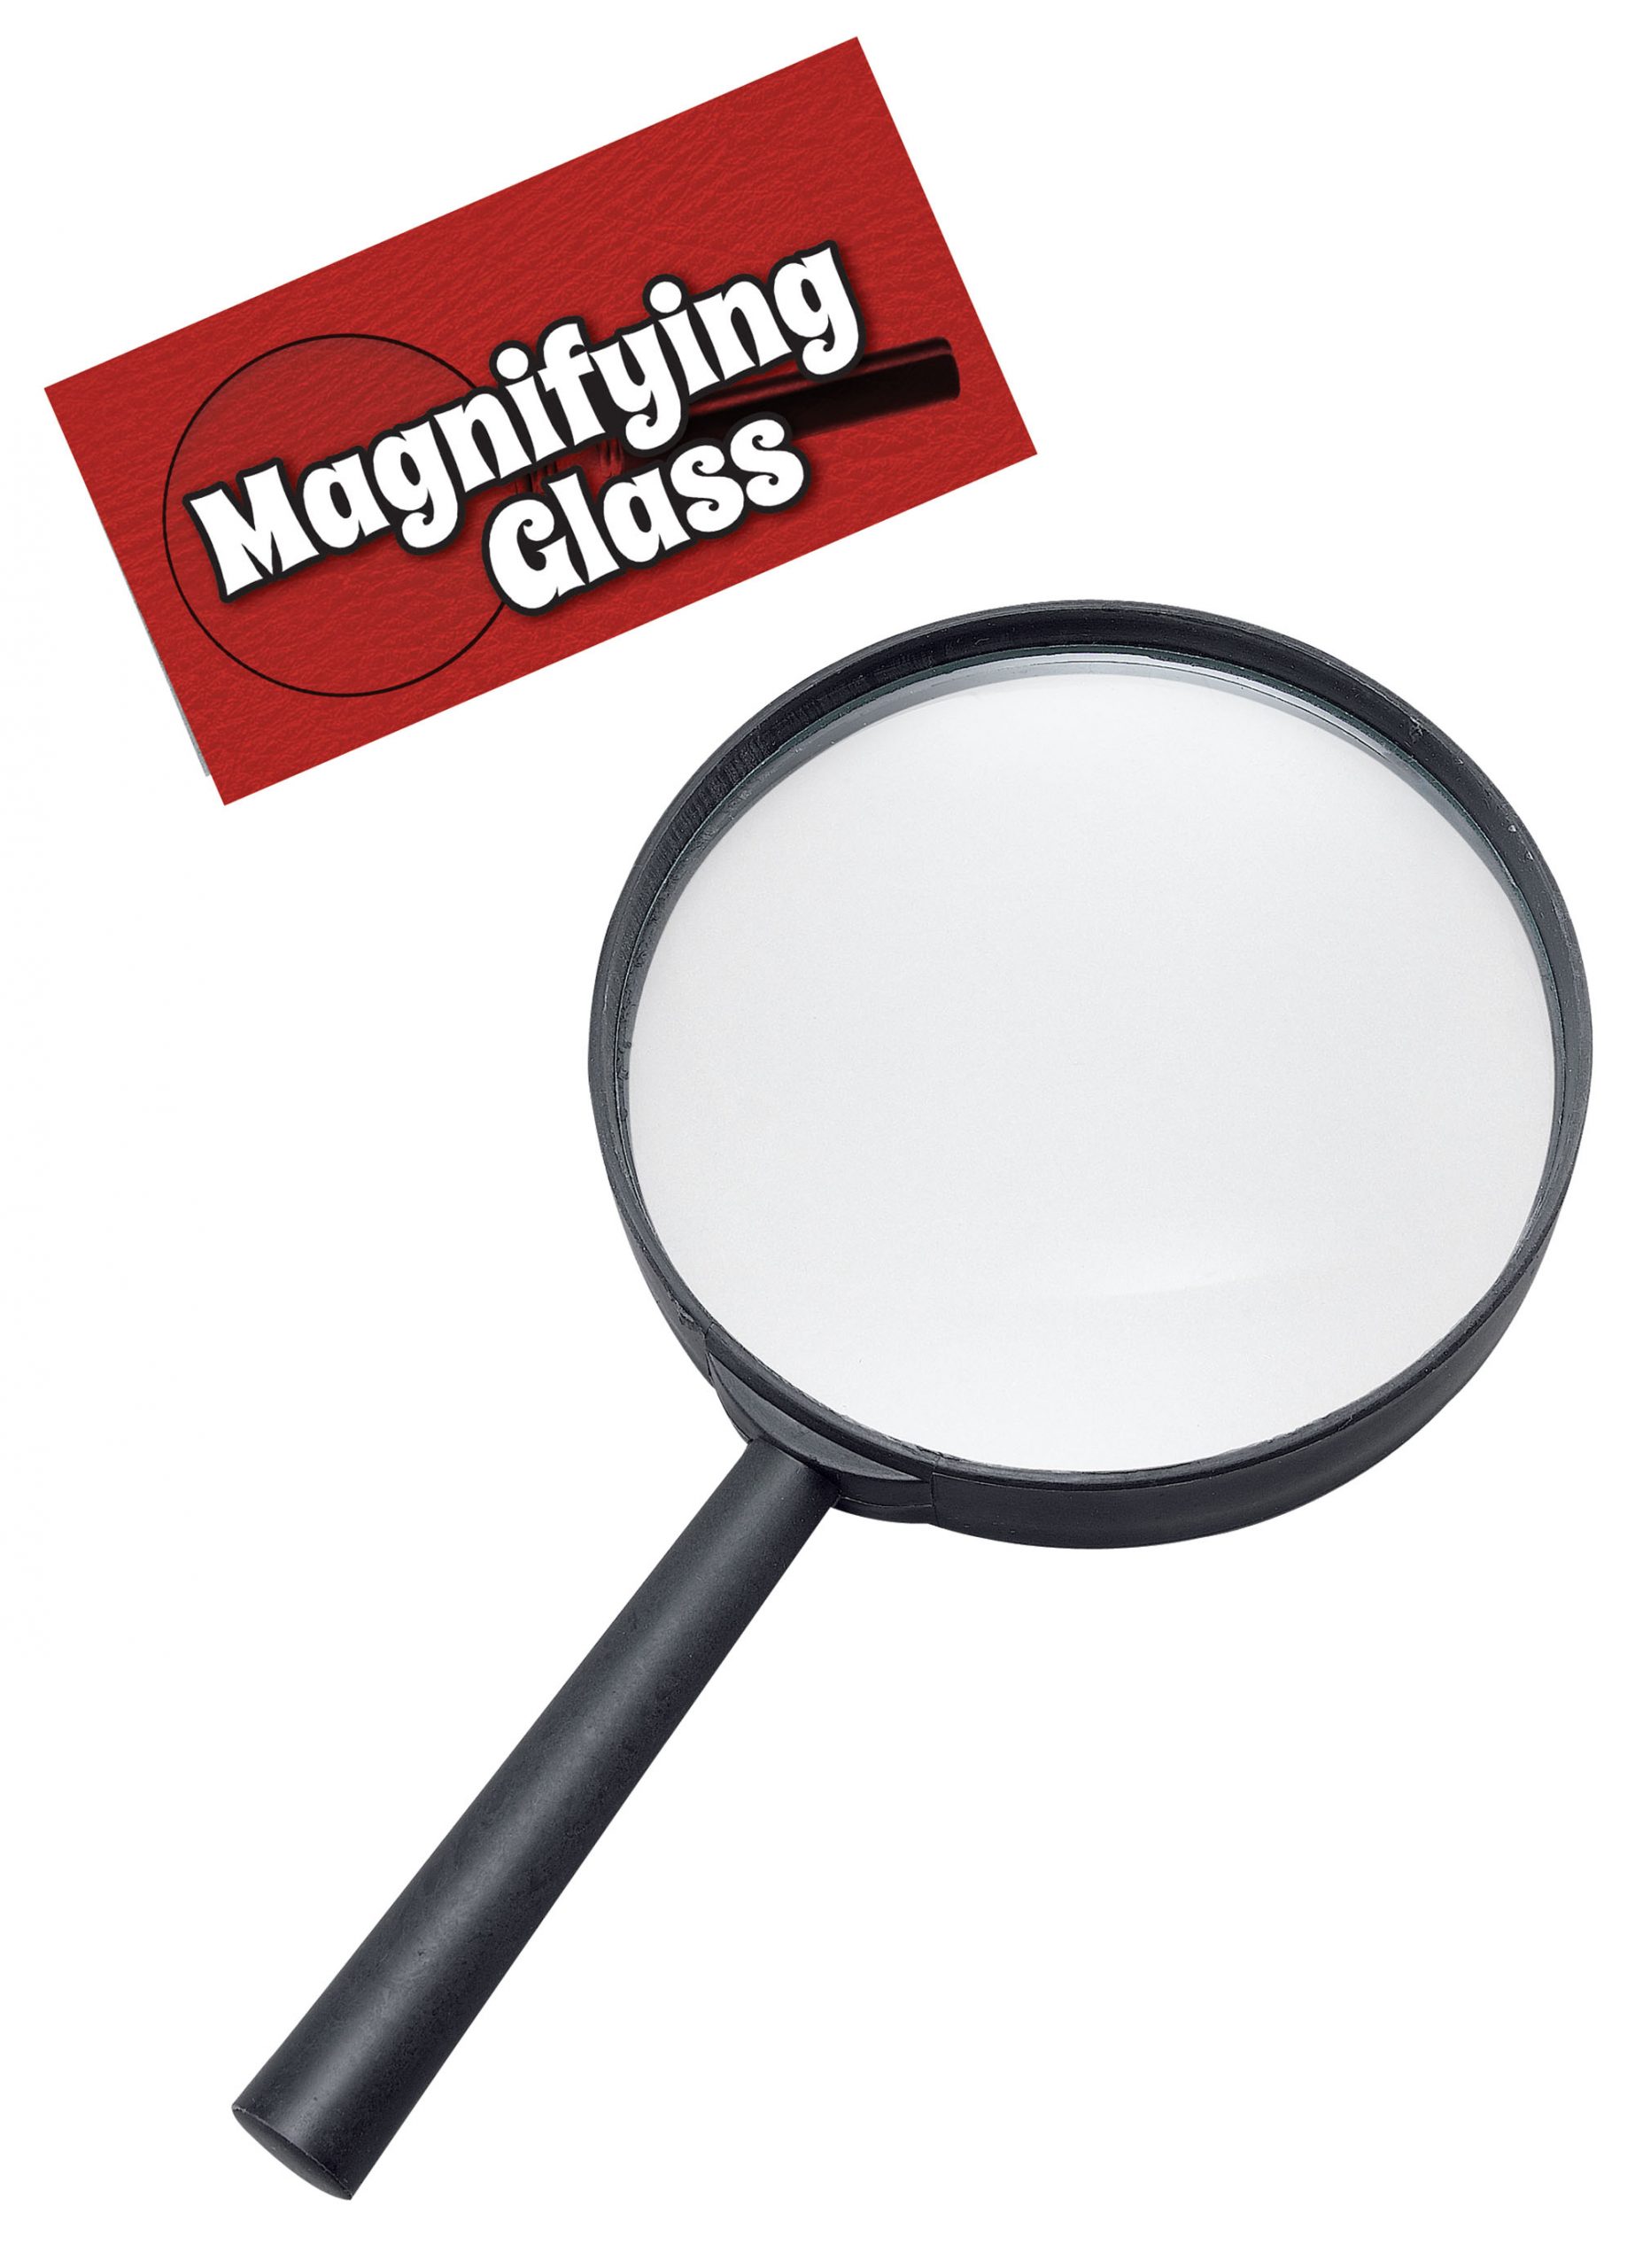 ACCESSORIES/PROPS/ Detective Magnifying Glass